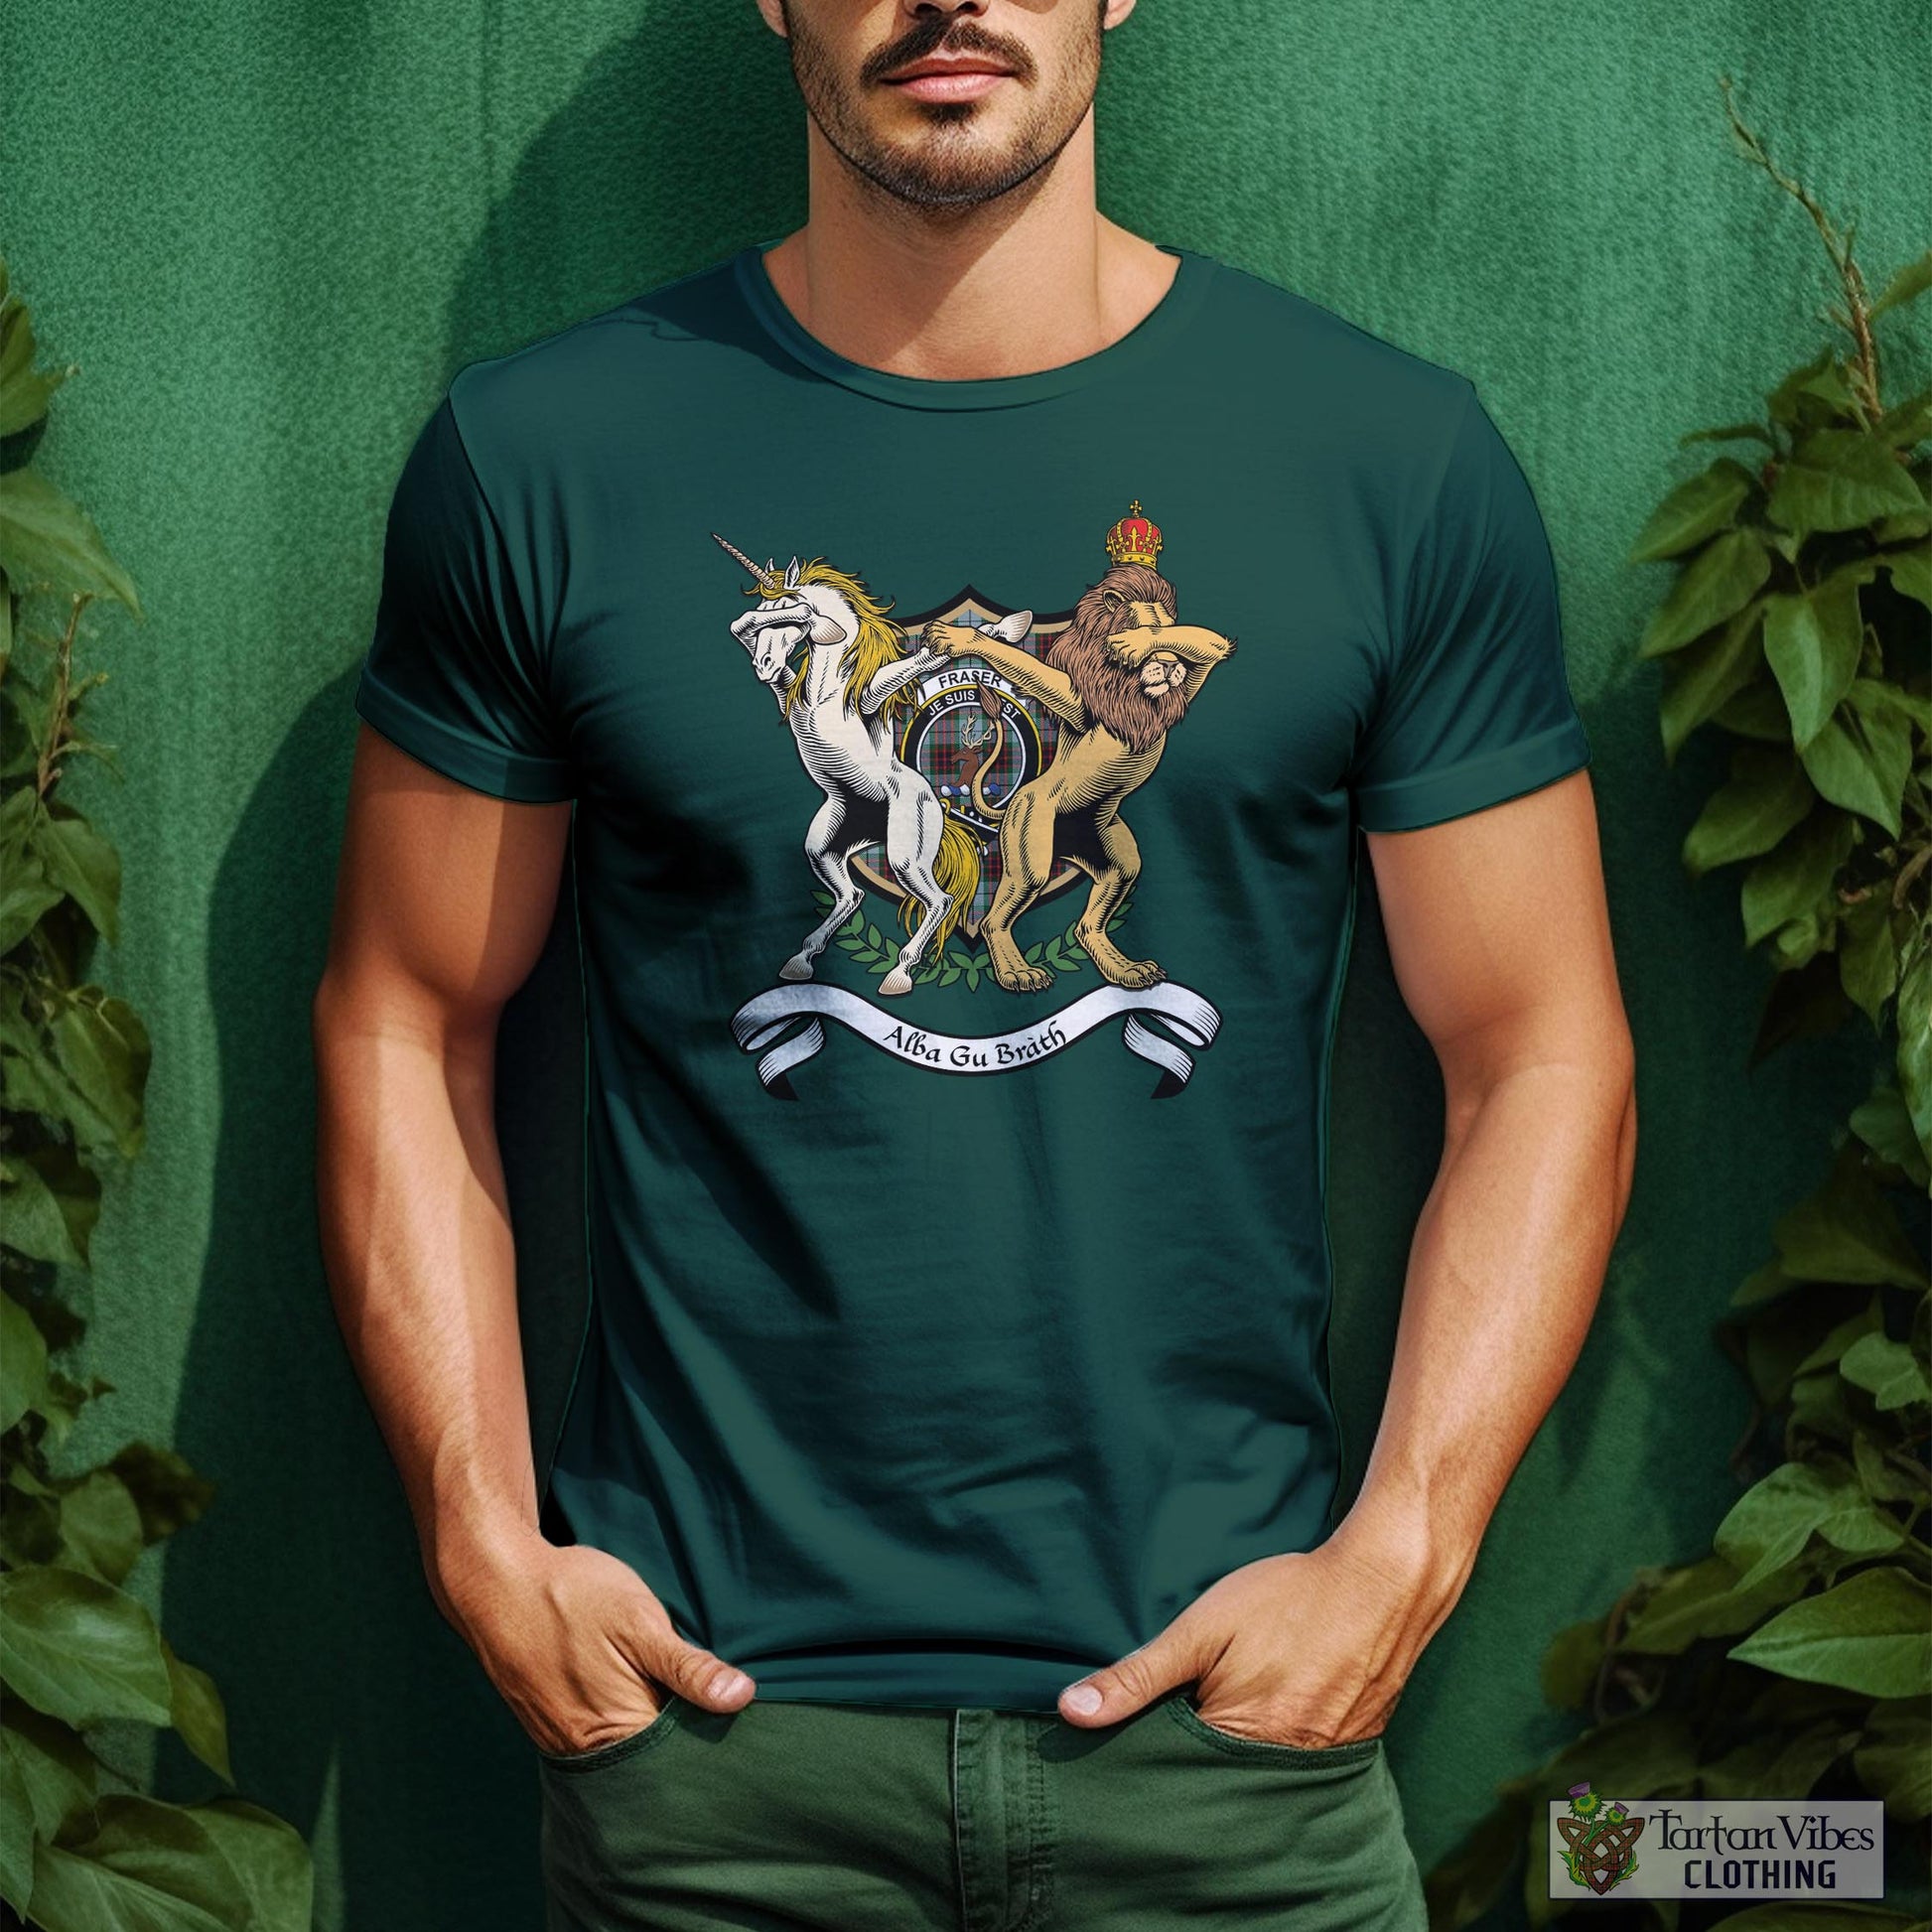 Tartan Vibes Clothing Fraser Dress Family Crest Cotton Men's T-Shirt with Scotland Royal Coat Of Arm Funny Style